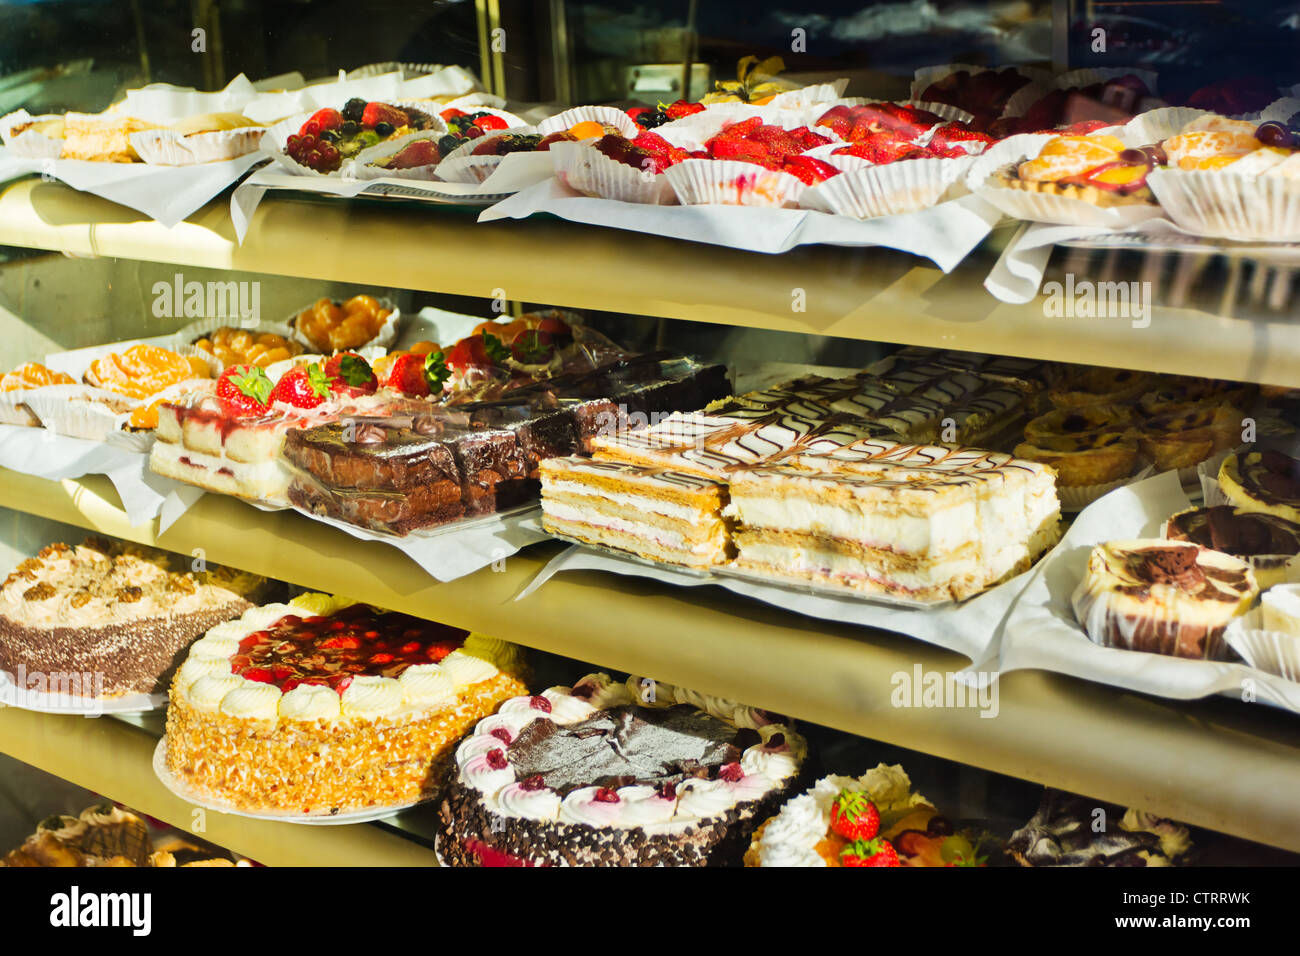 Window of a cake shop with a variety of cakes on display Stock Photo